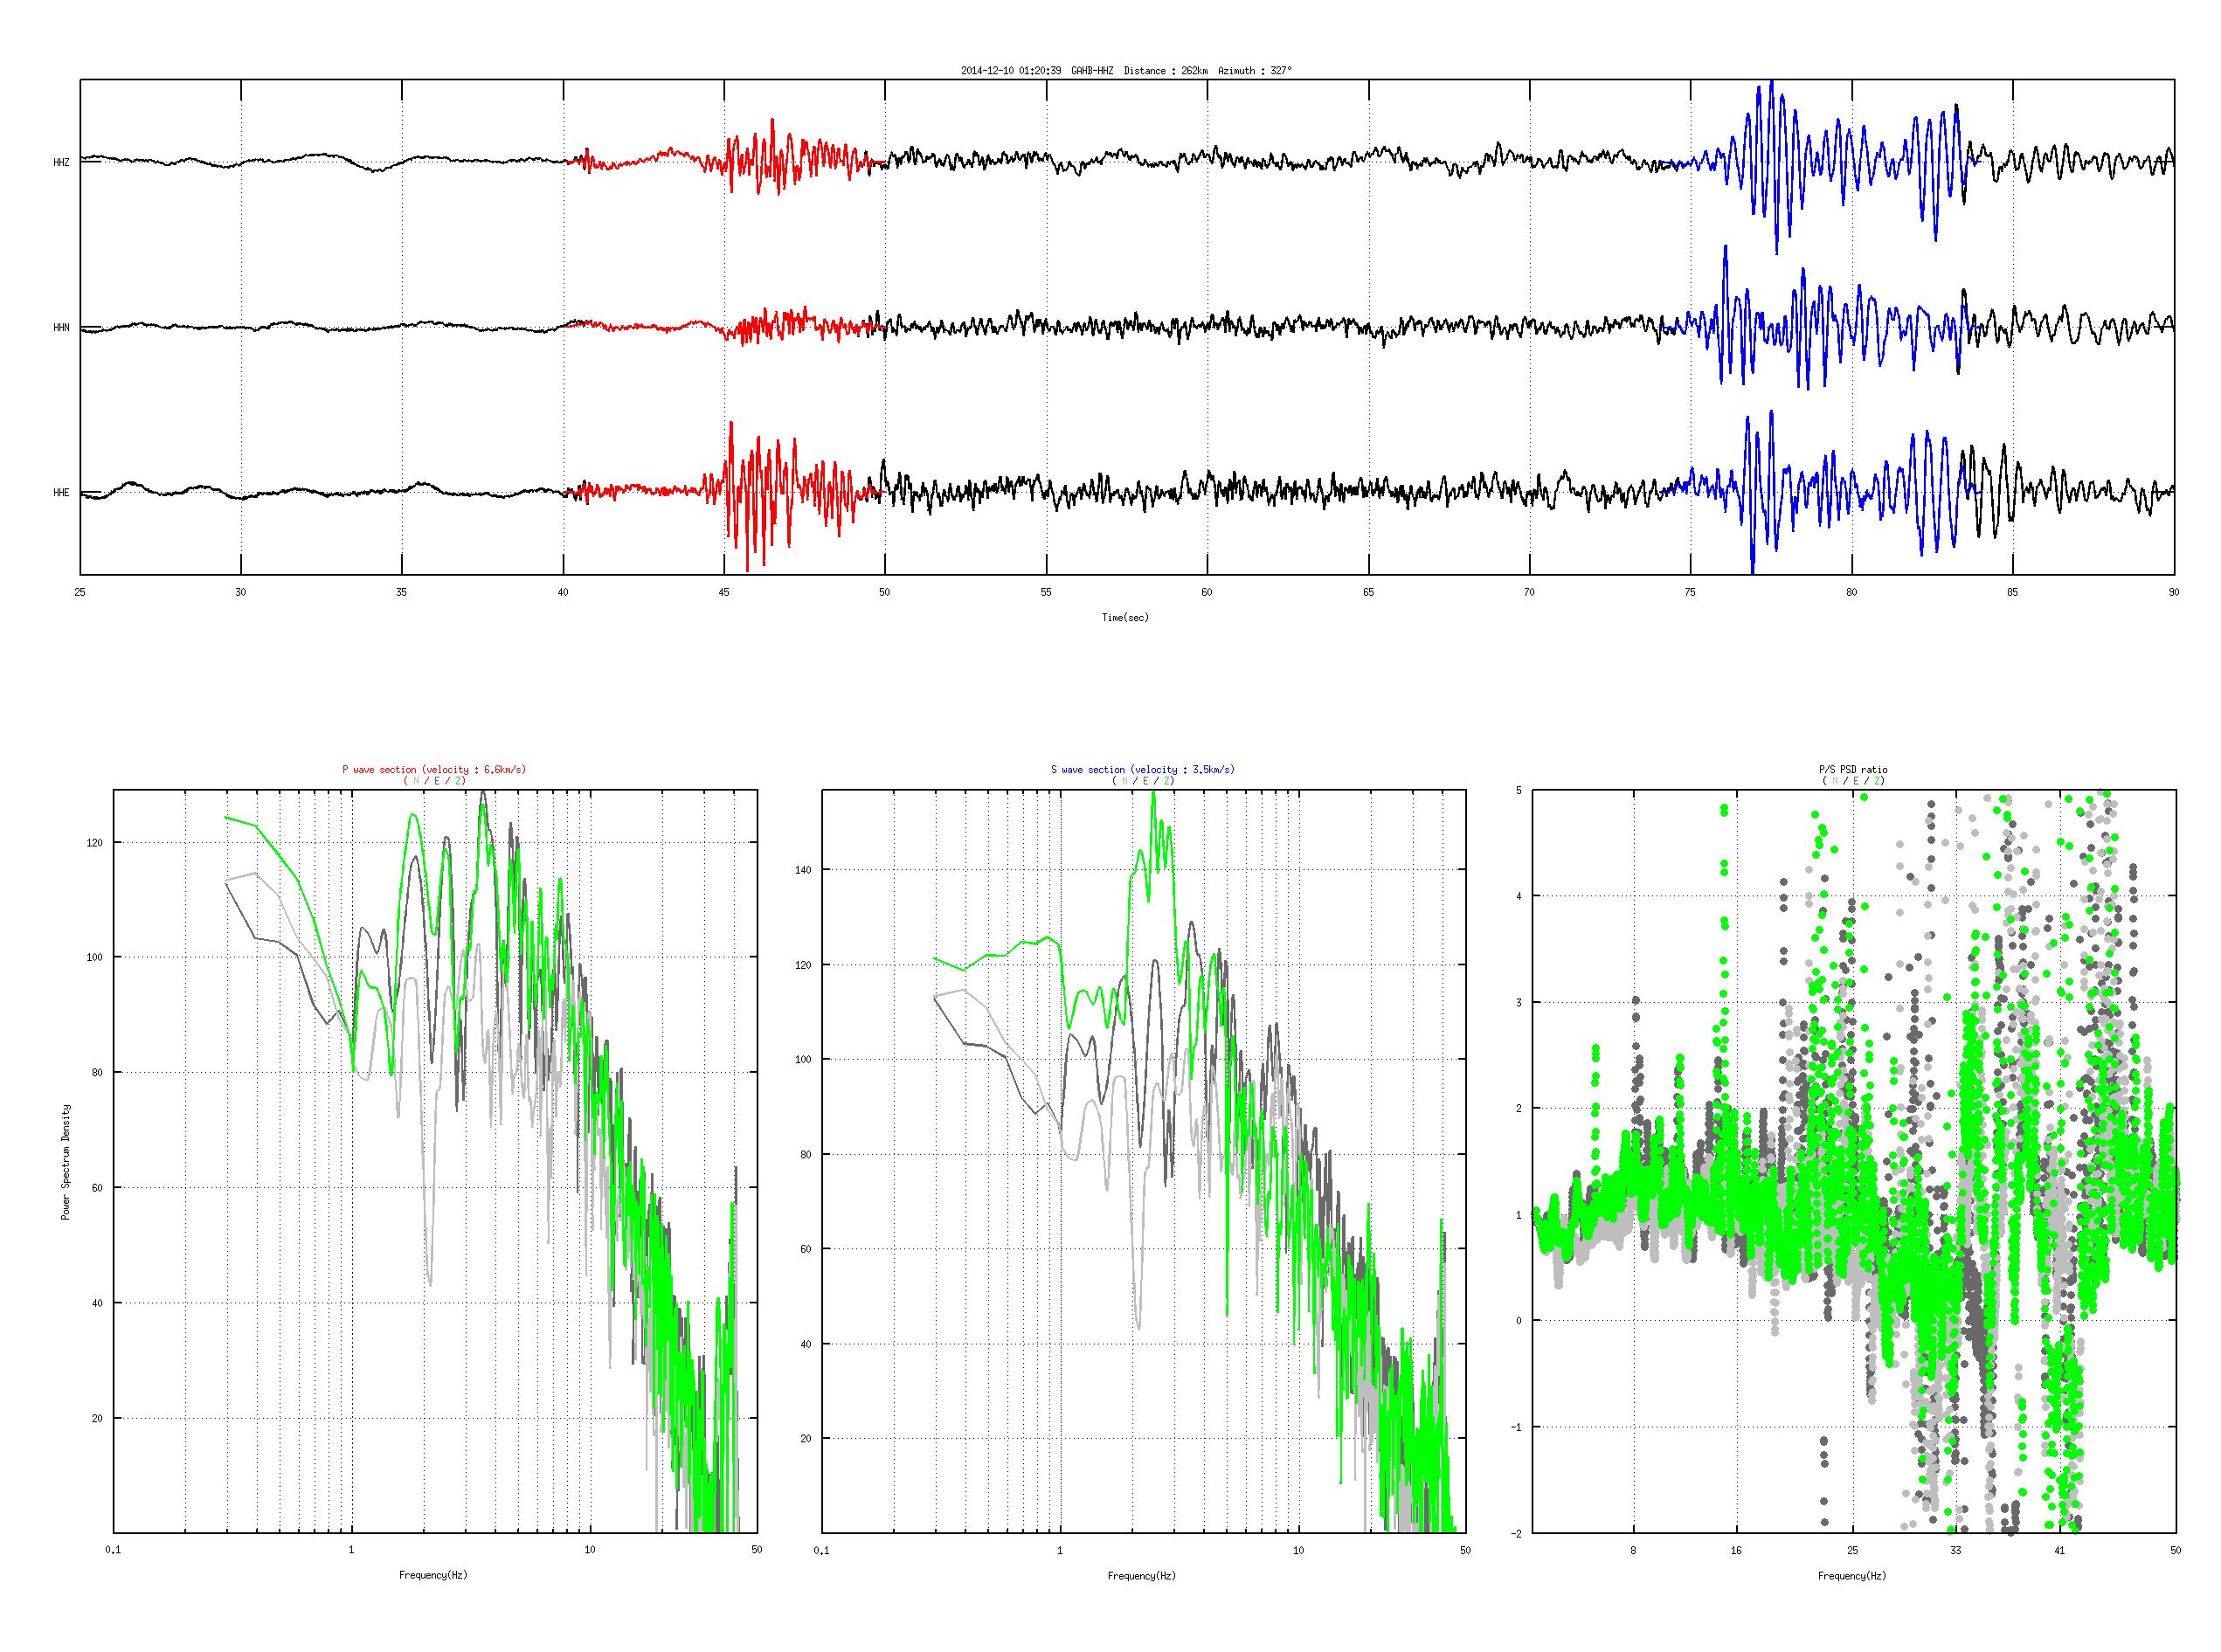 Pn/Sn spectral ratio of 2014/12/14 explosion from GAHB station.